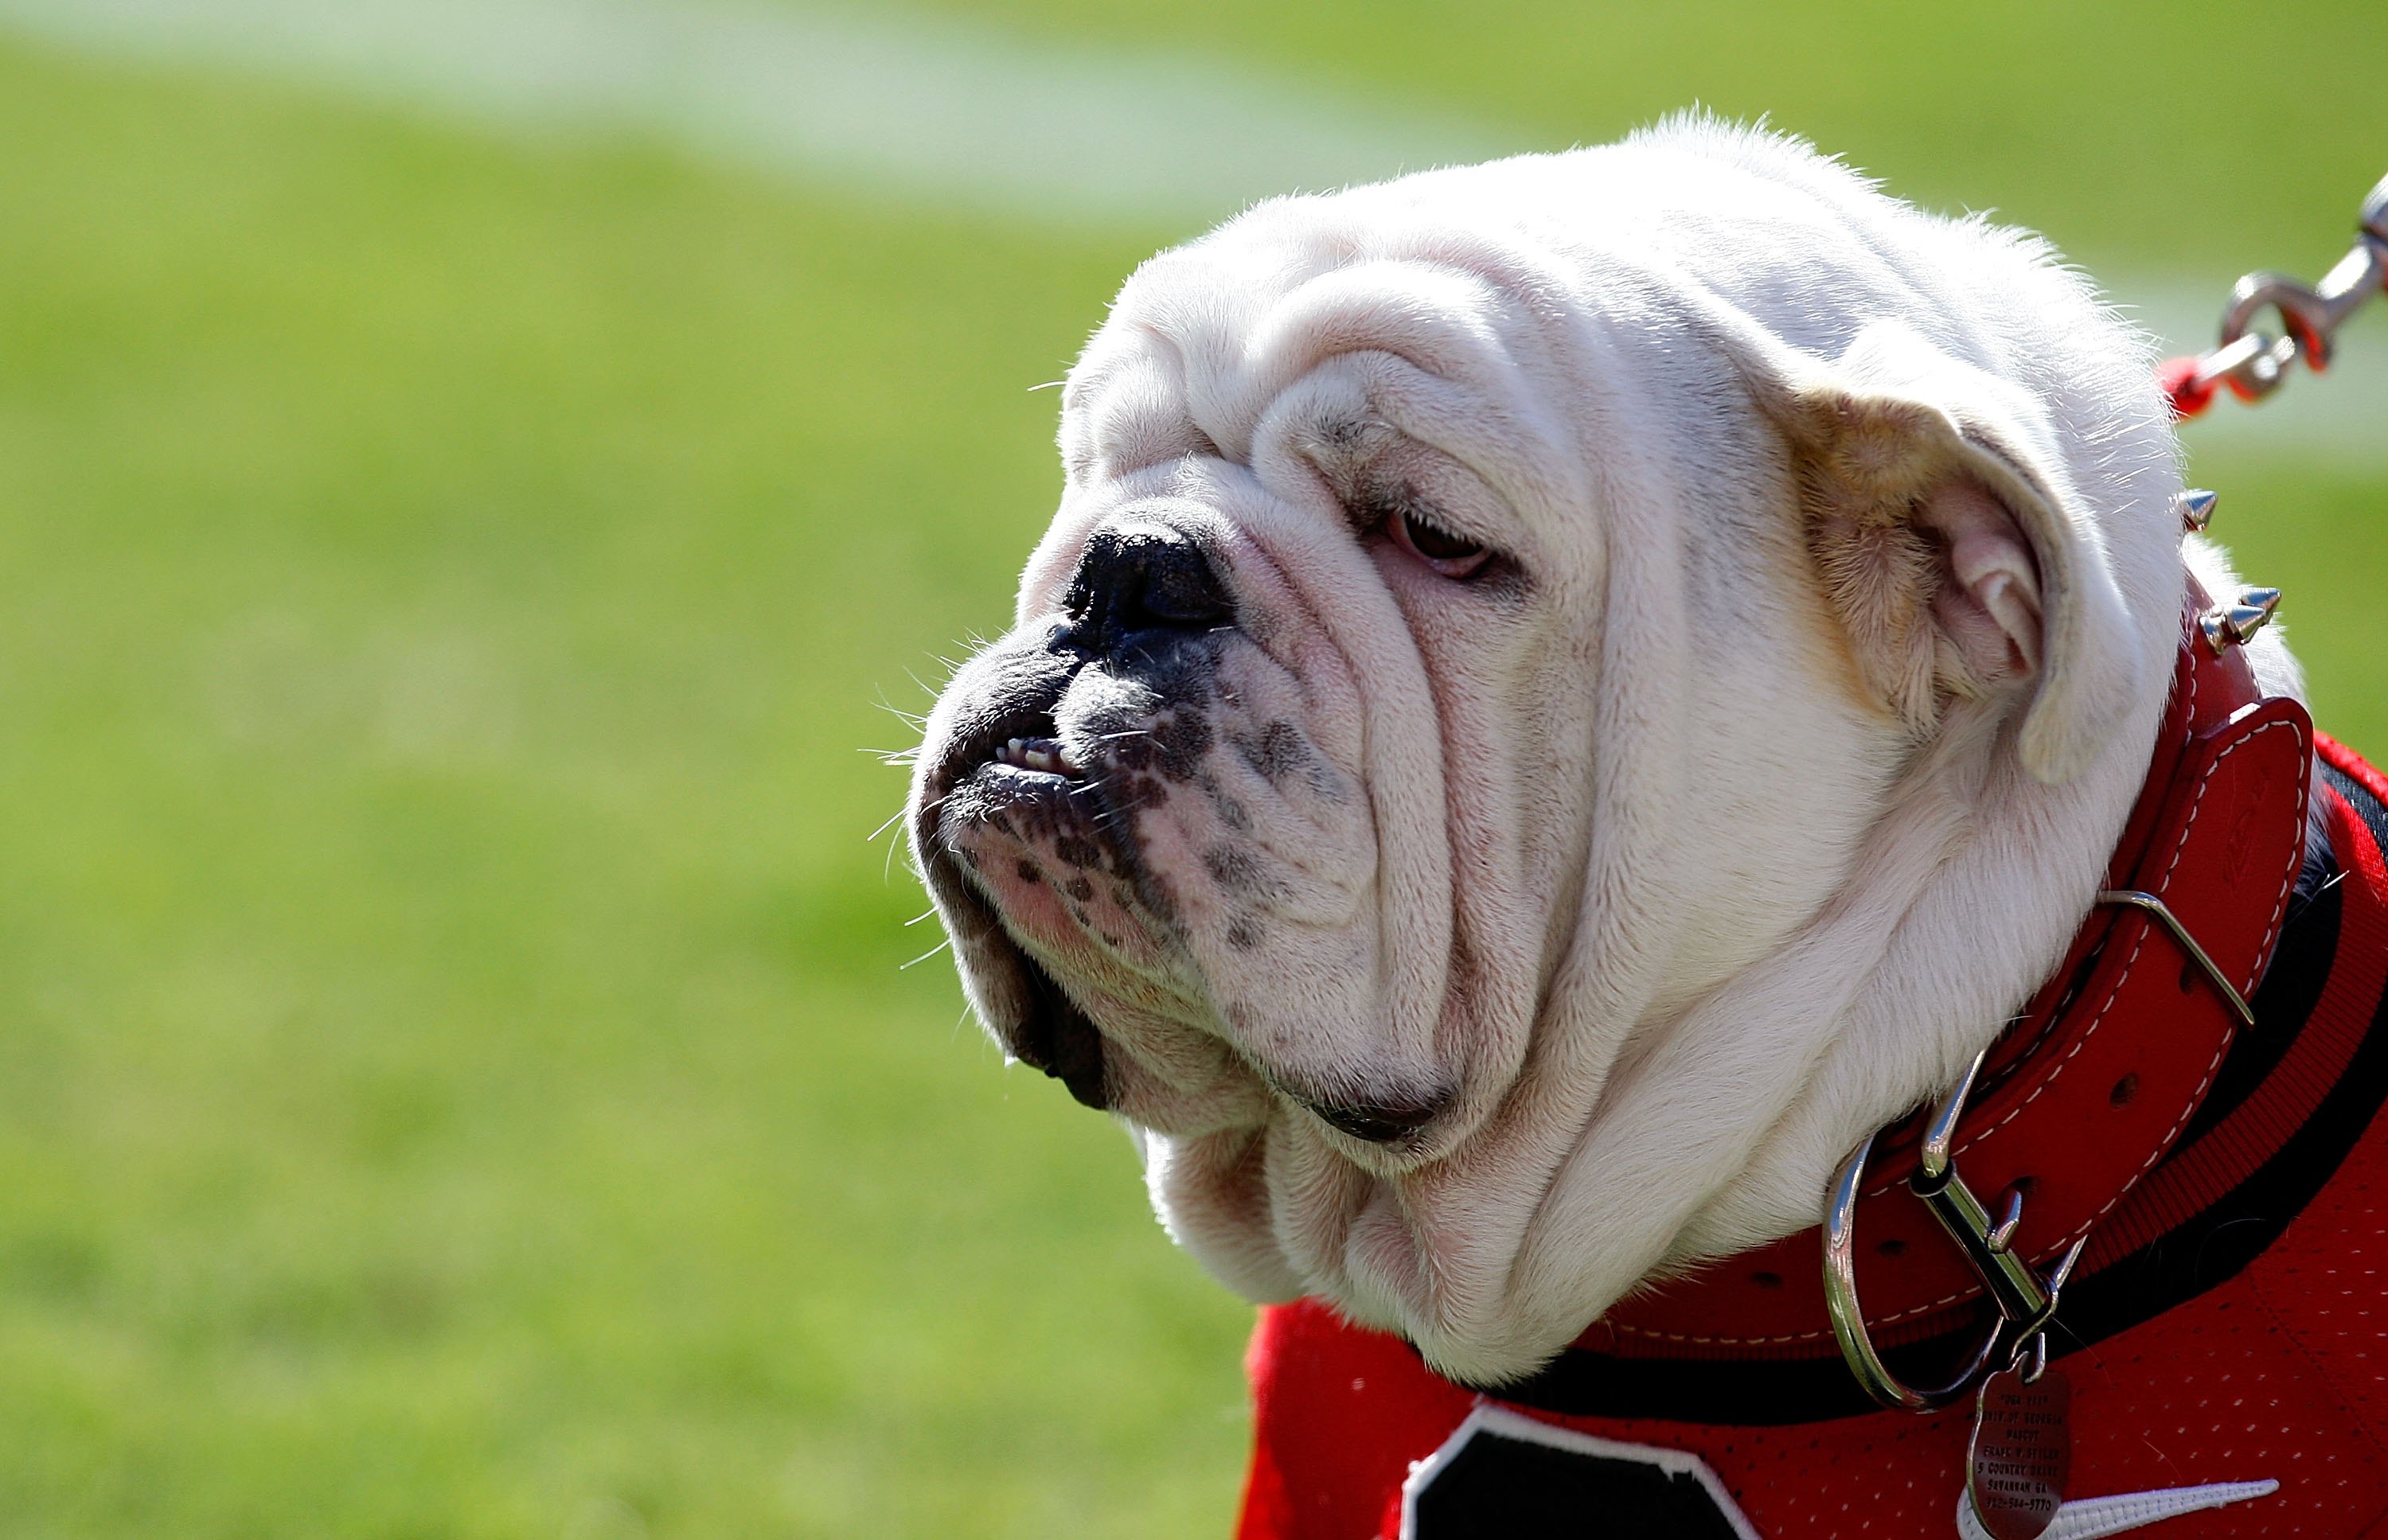 ATHENS, GA - OCTOBER 03:  UGA VII, mascot of the Georgia Bulldogs, watches the game against the Louisiana State University Tigers from the sidelines at Sanford Stadium on October 3, 2009 in Athens, Georgia.  (Photo by Kevin C. Cox/Getty Images)